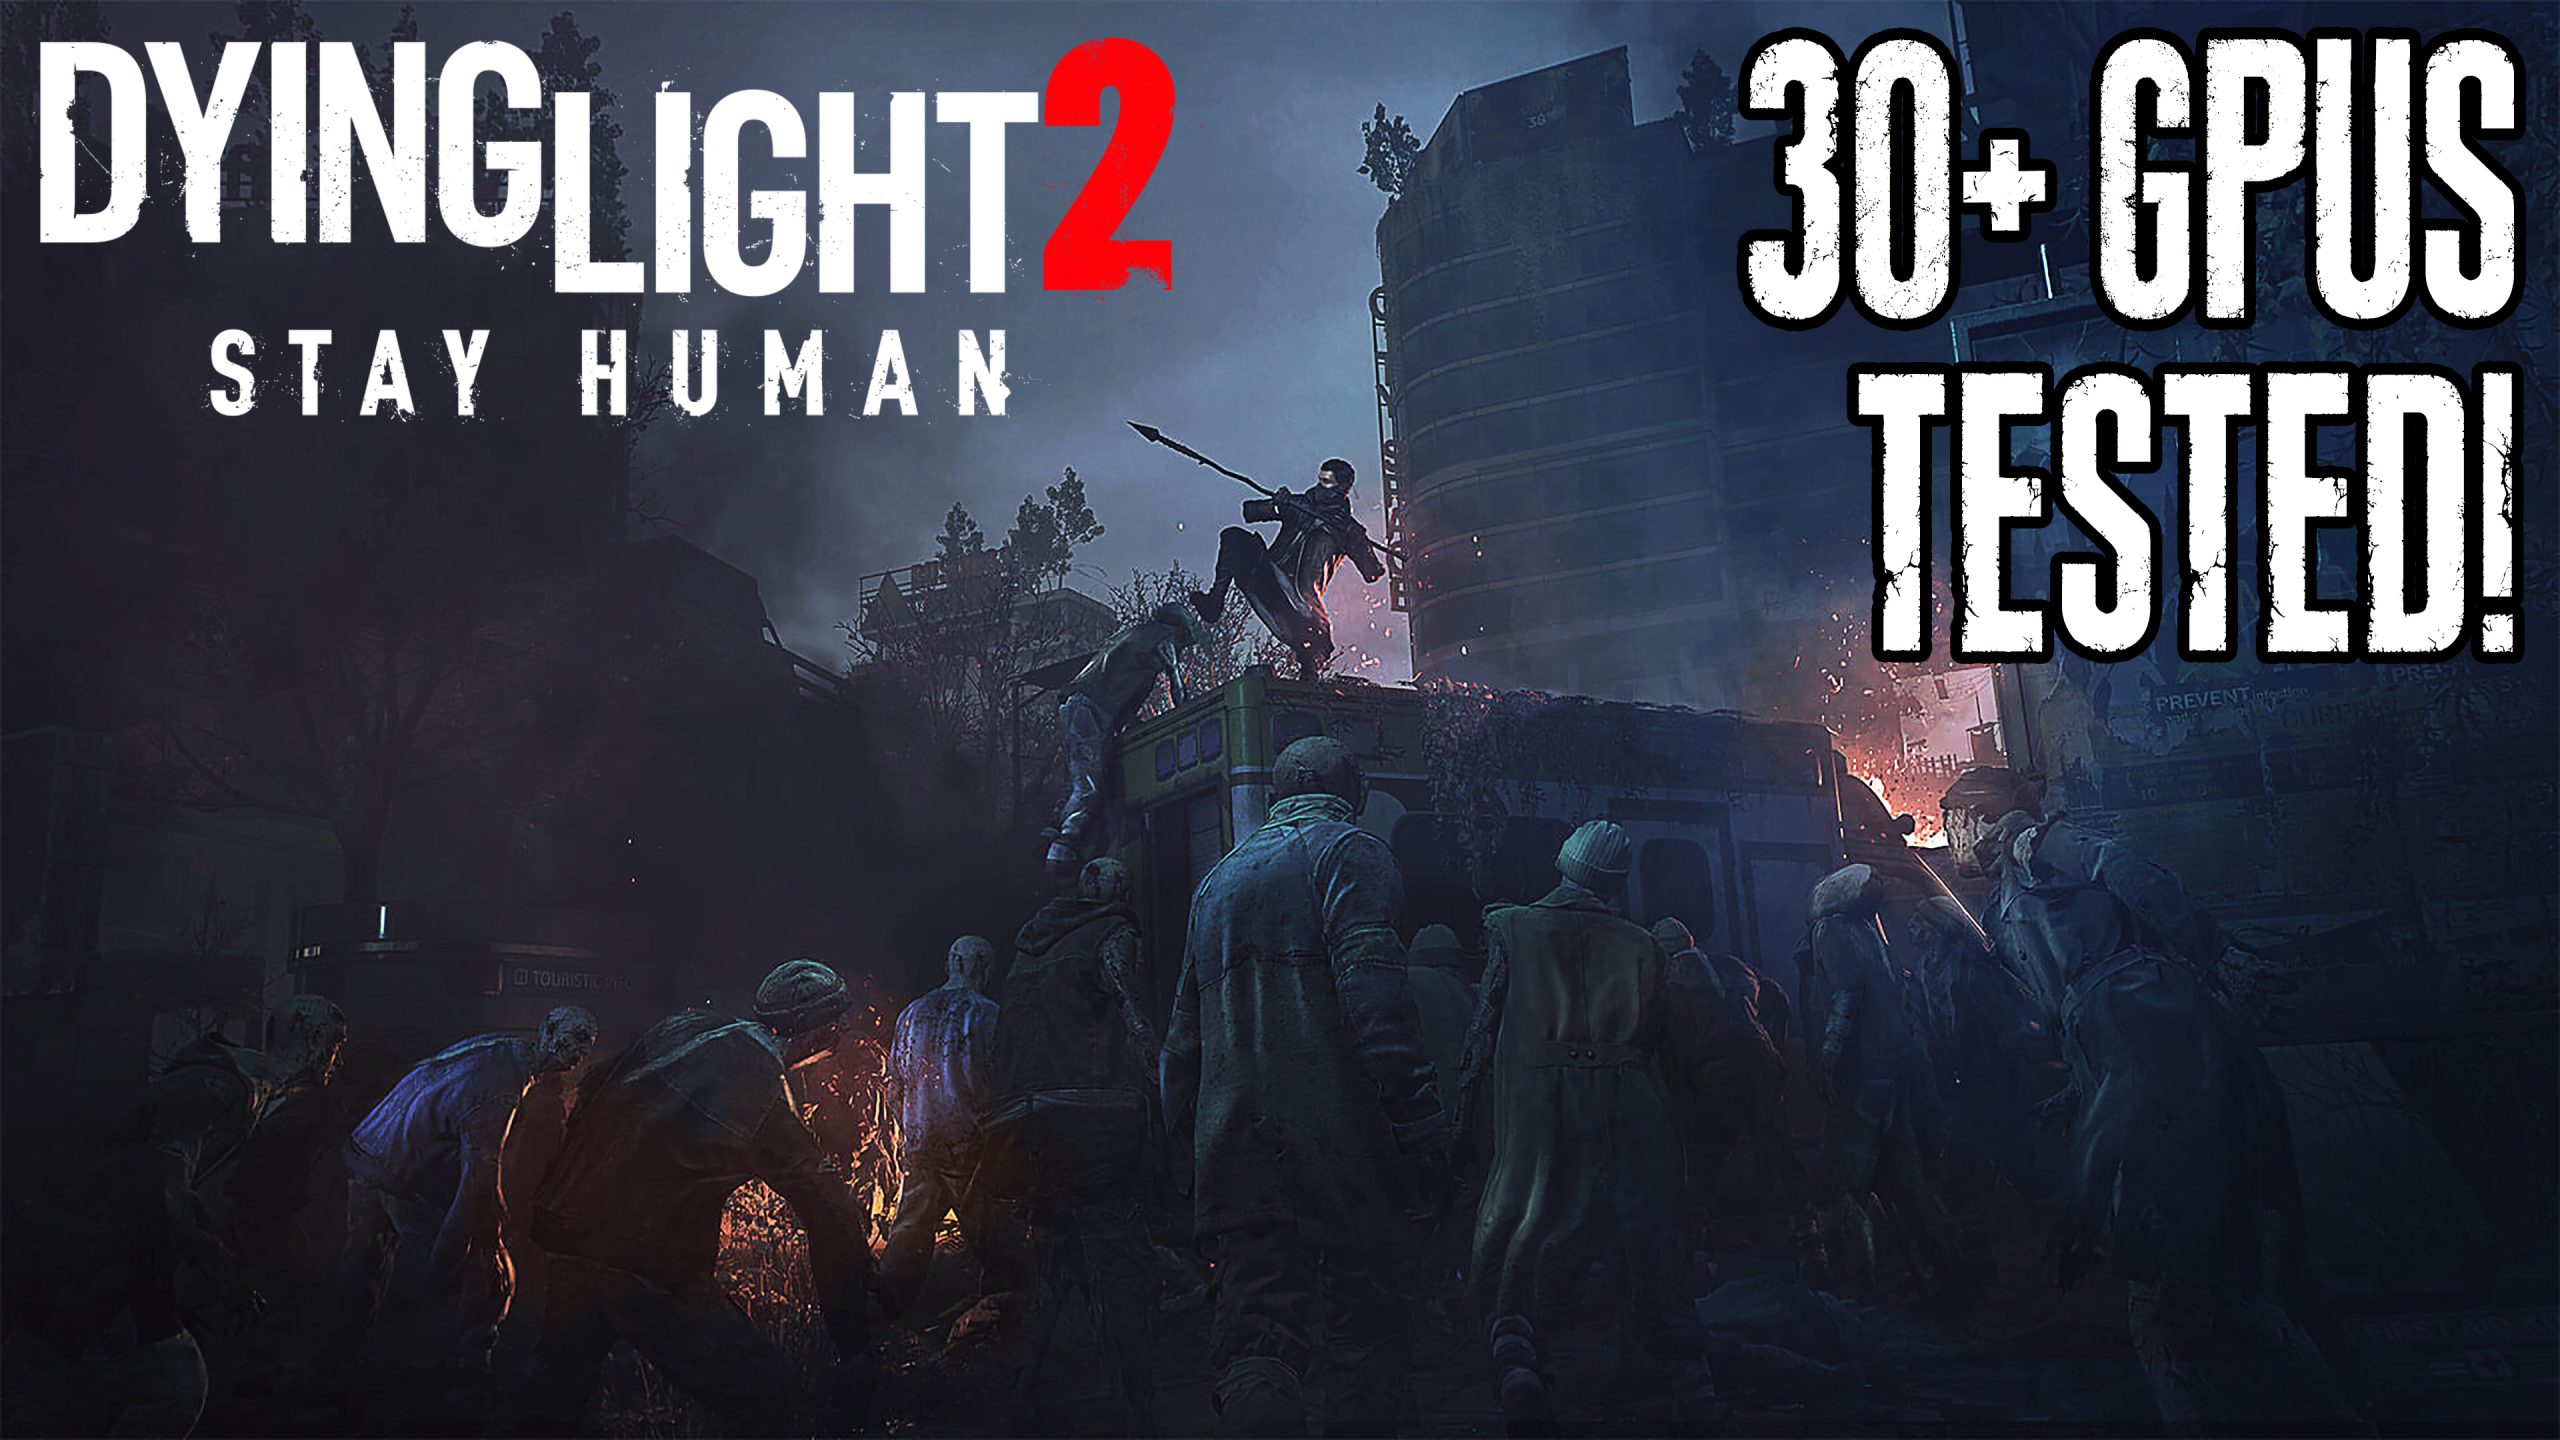 Dying Light 2 PC Performance Benchmark: 30+ GPUs Tested!